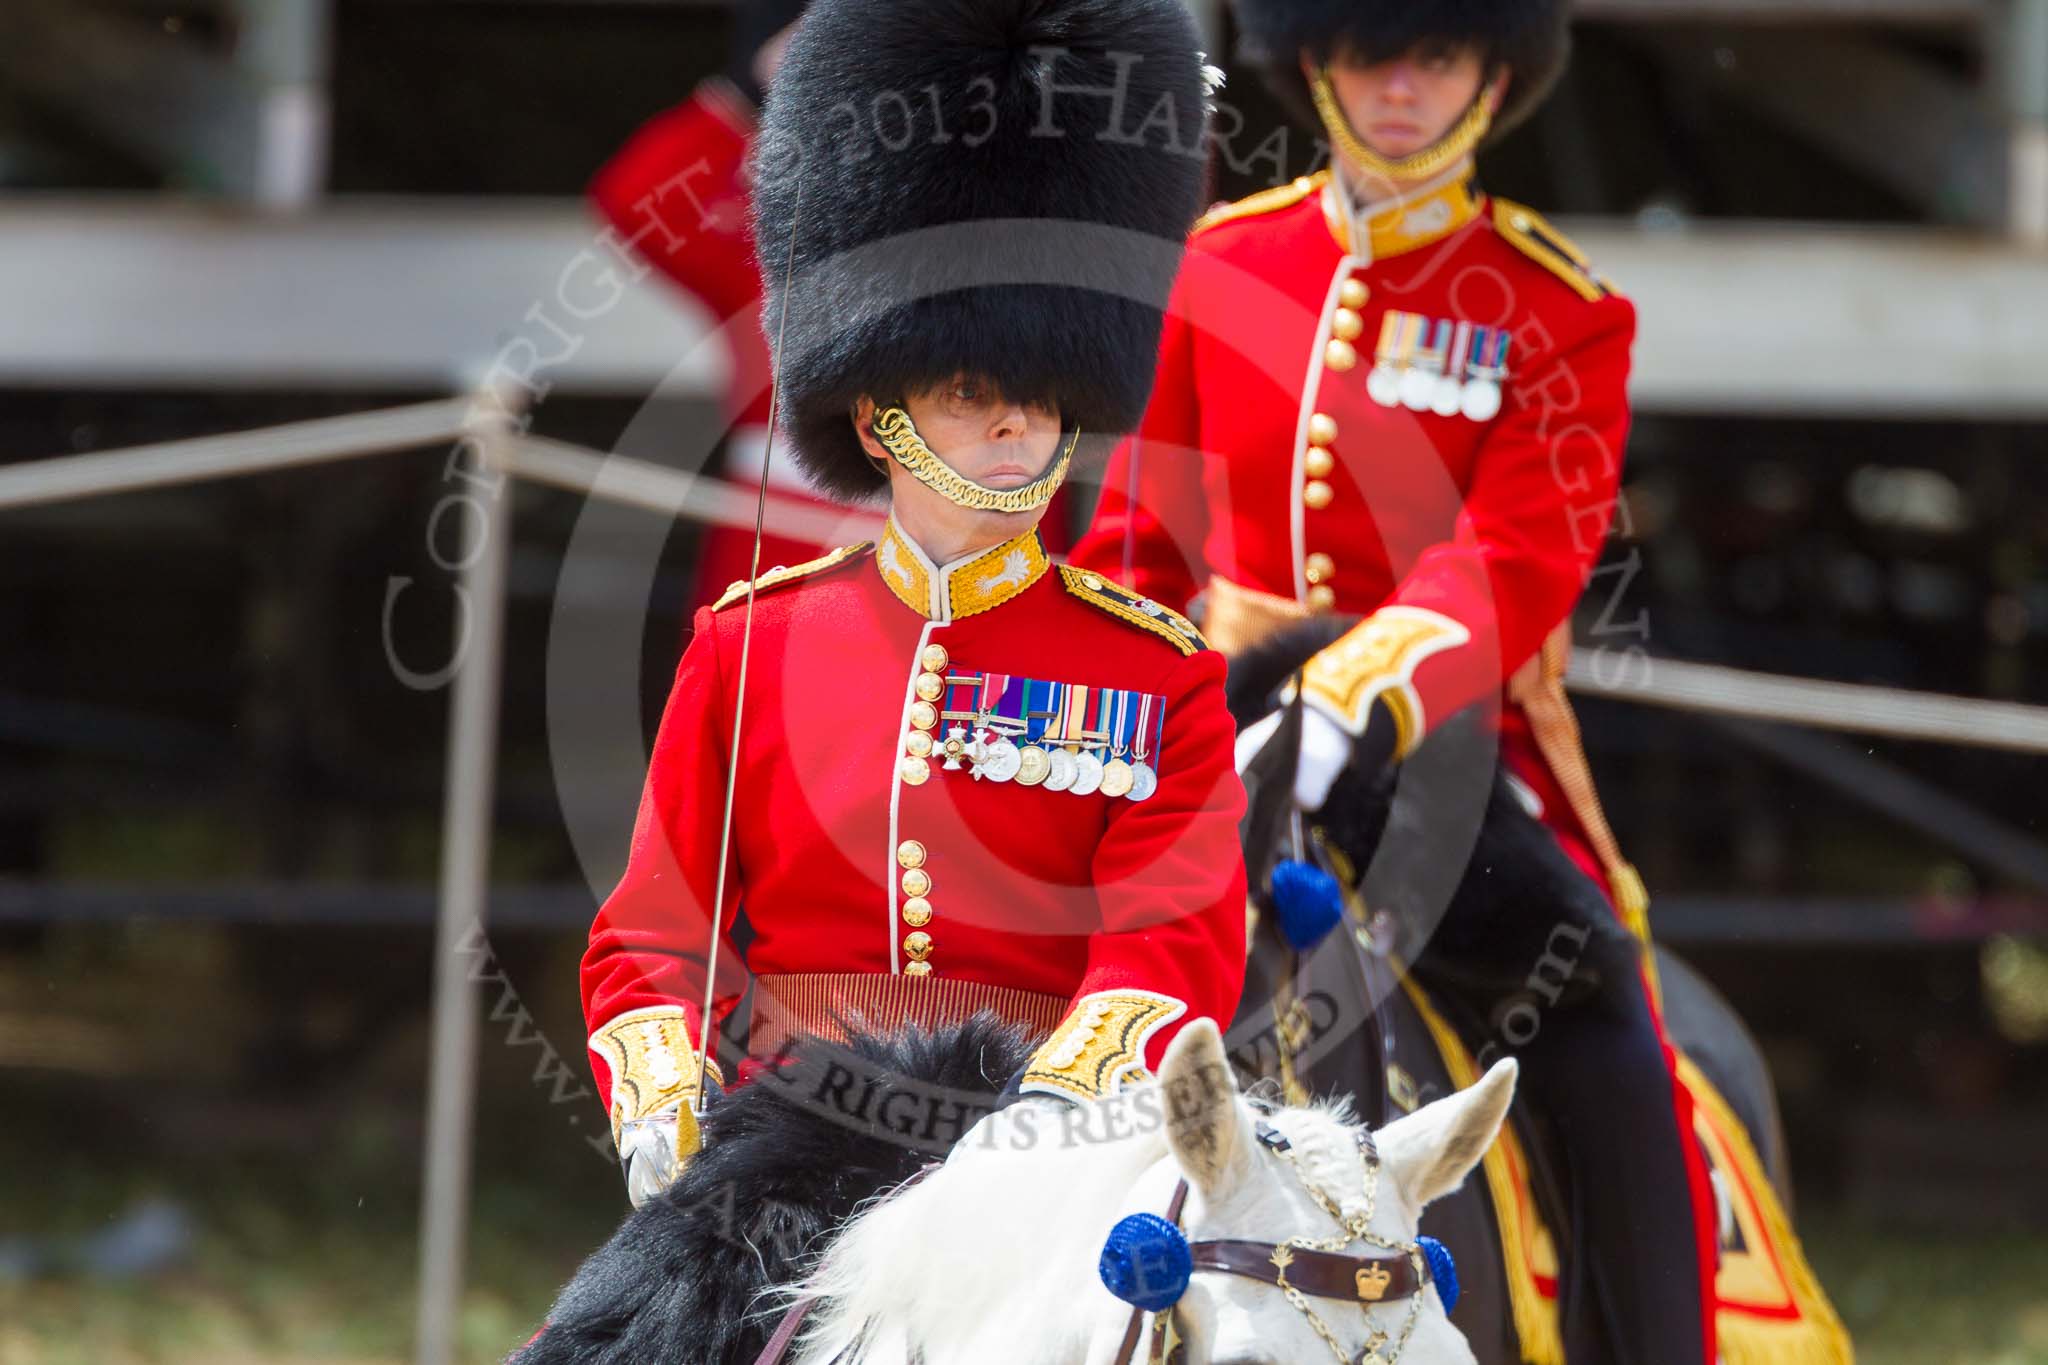 The Colonel's Review 2015.
Horse Guards Parade, Westminster,
London,

United Kingdom,
on 06 June 2015 at 11:42, image #425